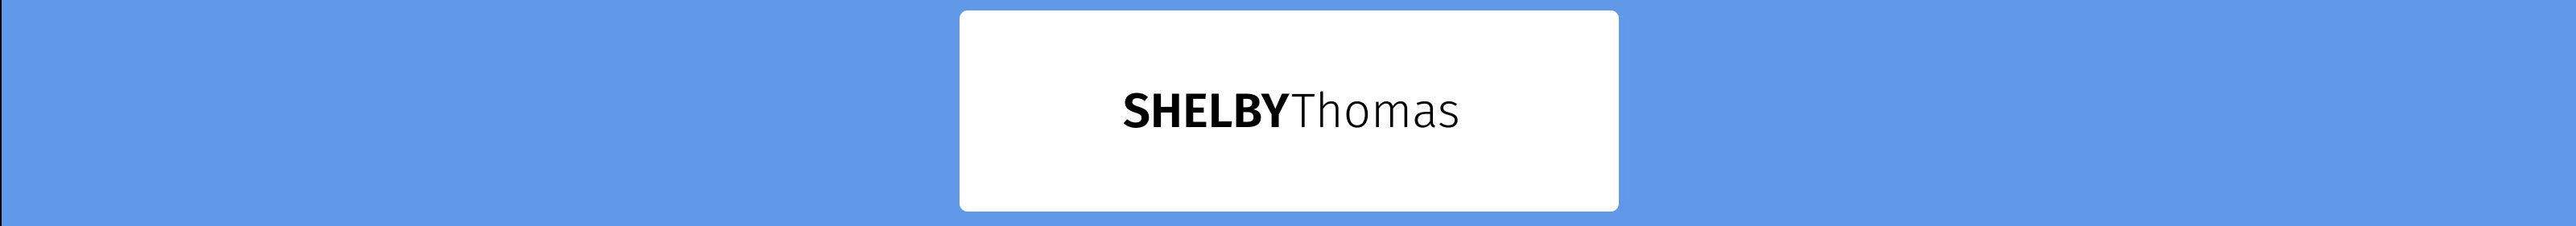 Shelby Thomas's profile banner